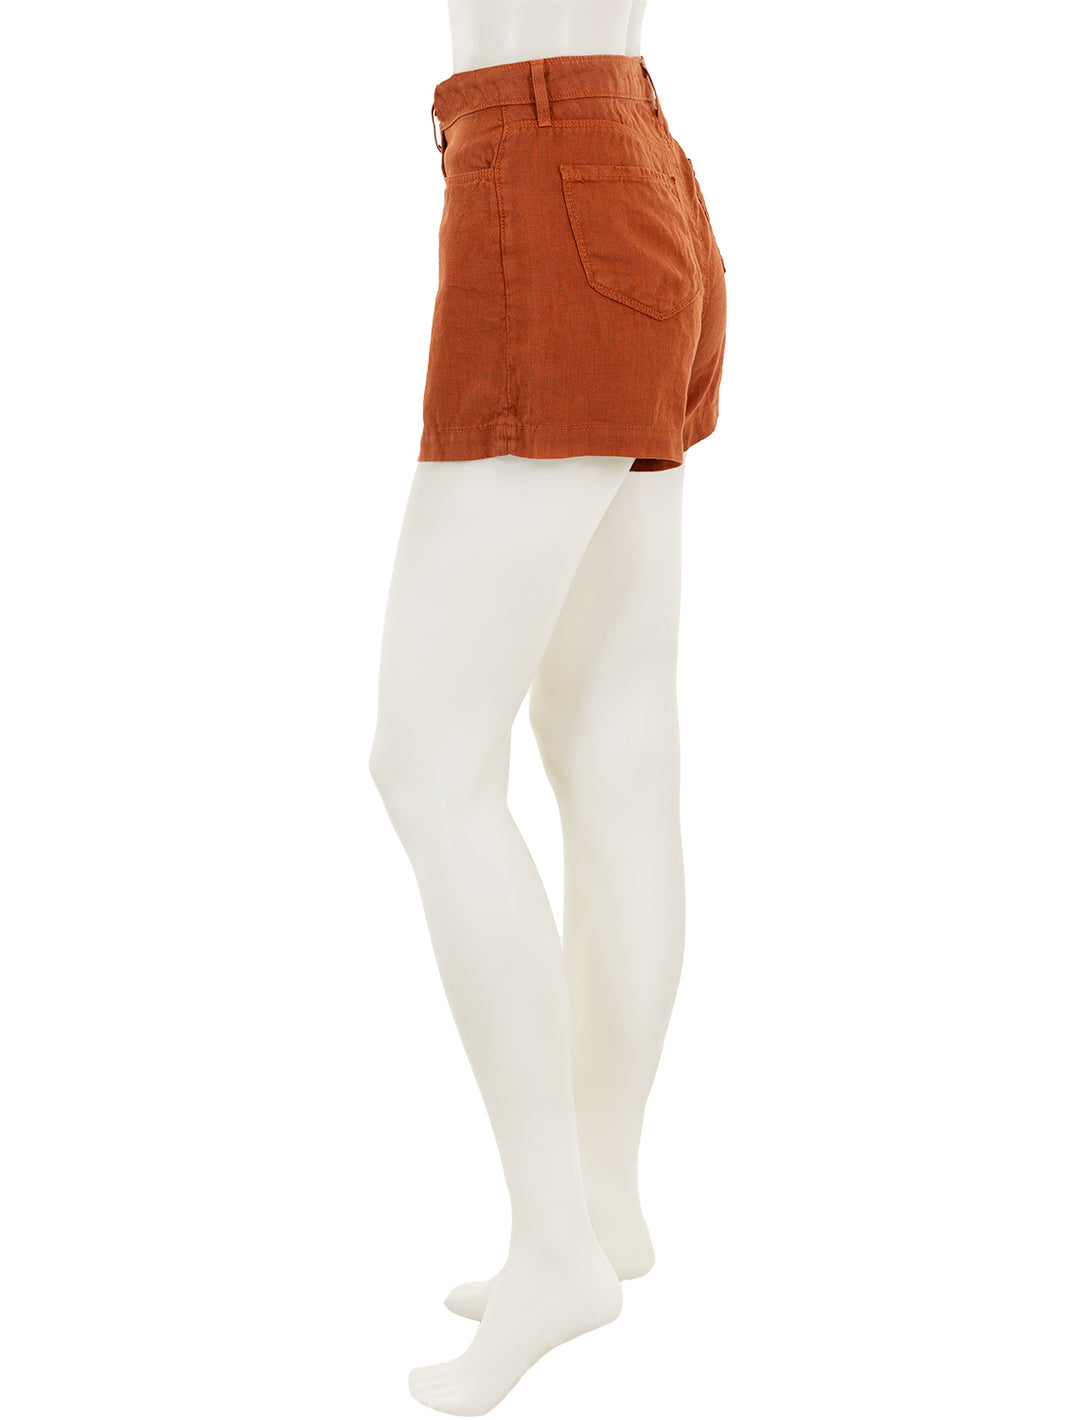 Side view of L'agence's gina shorts in sienna.